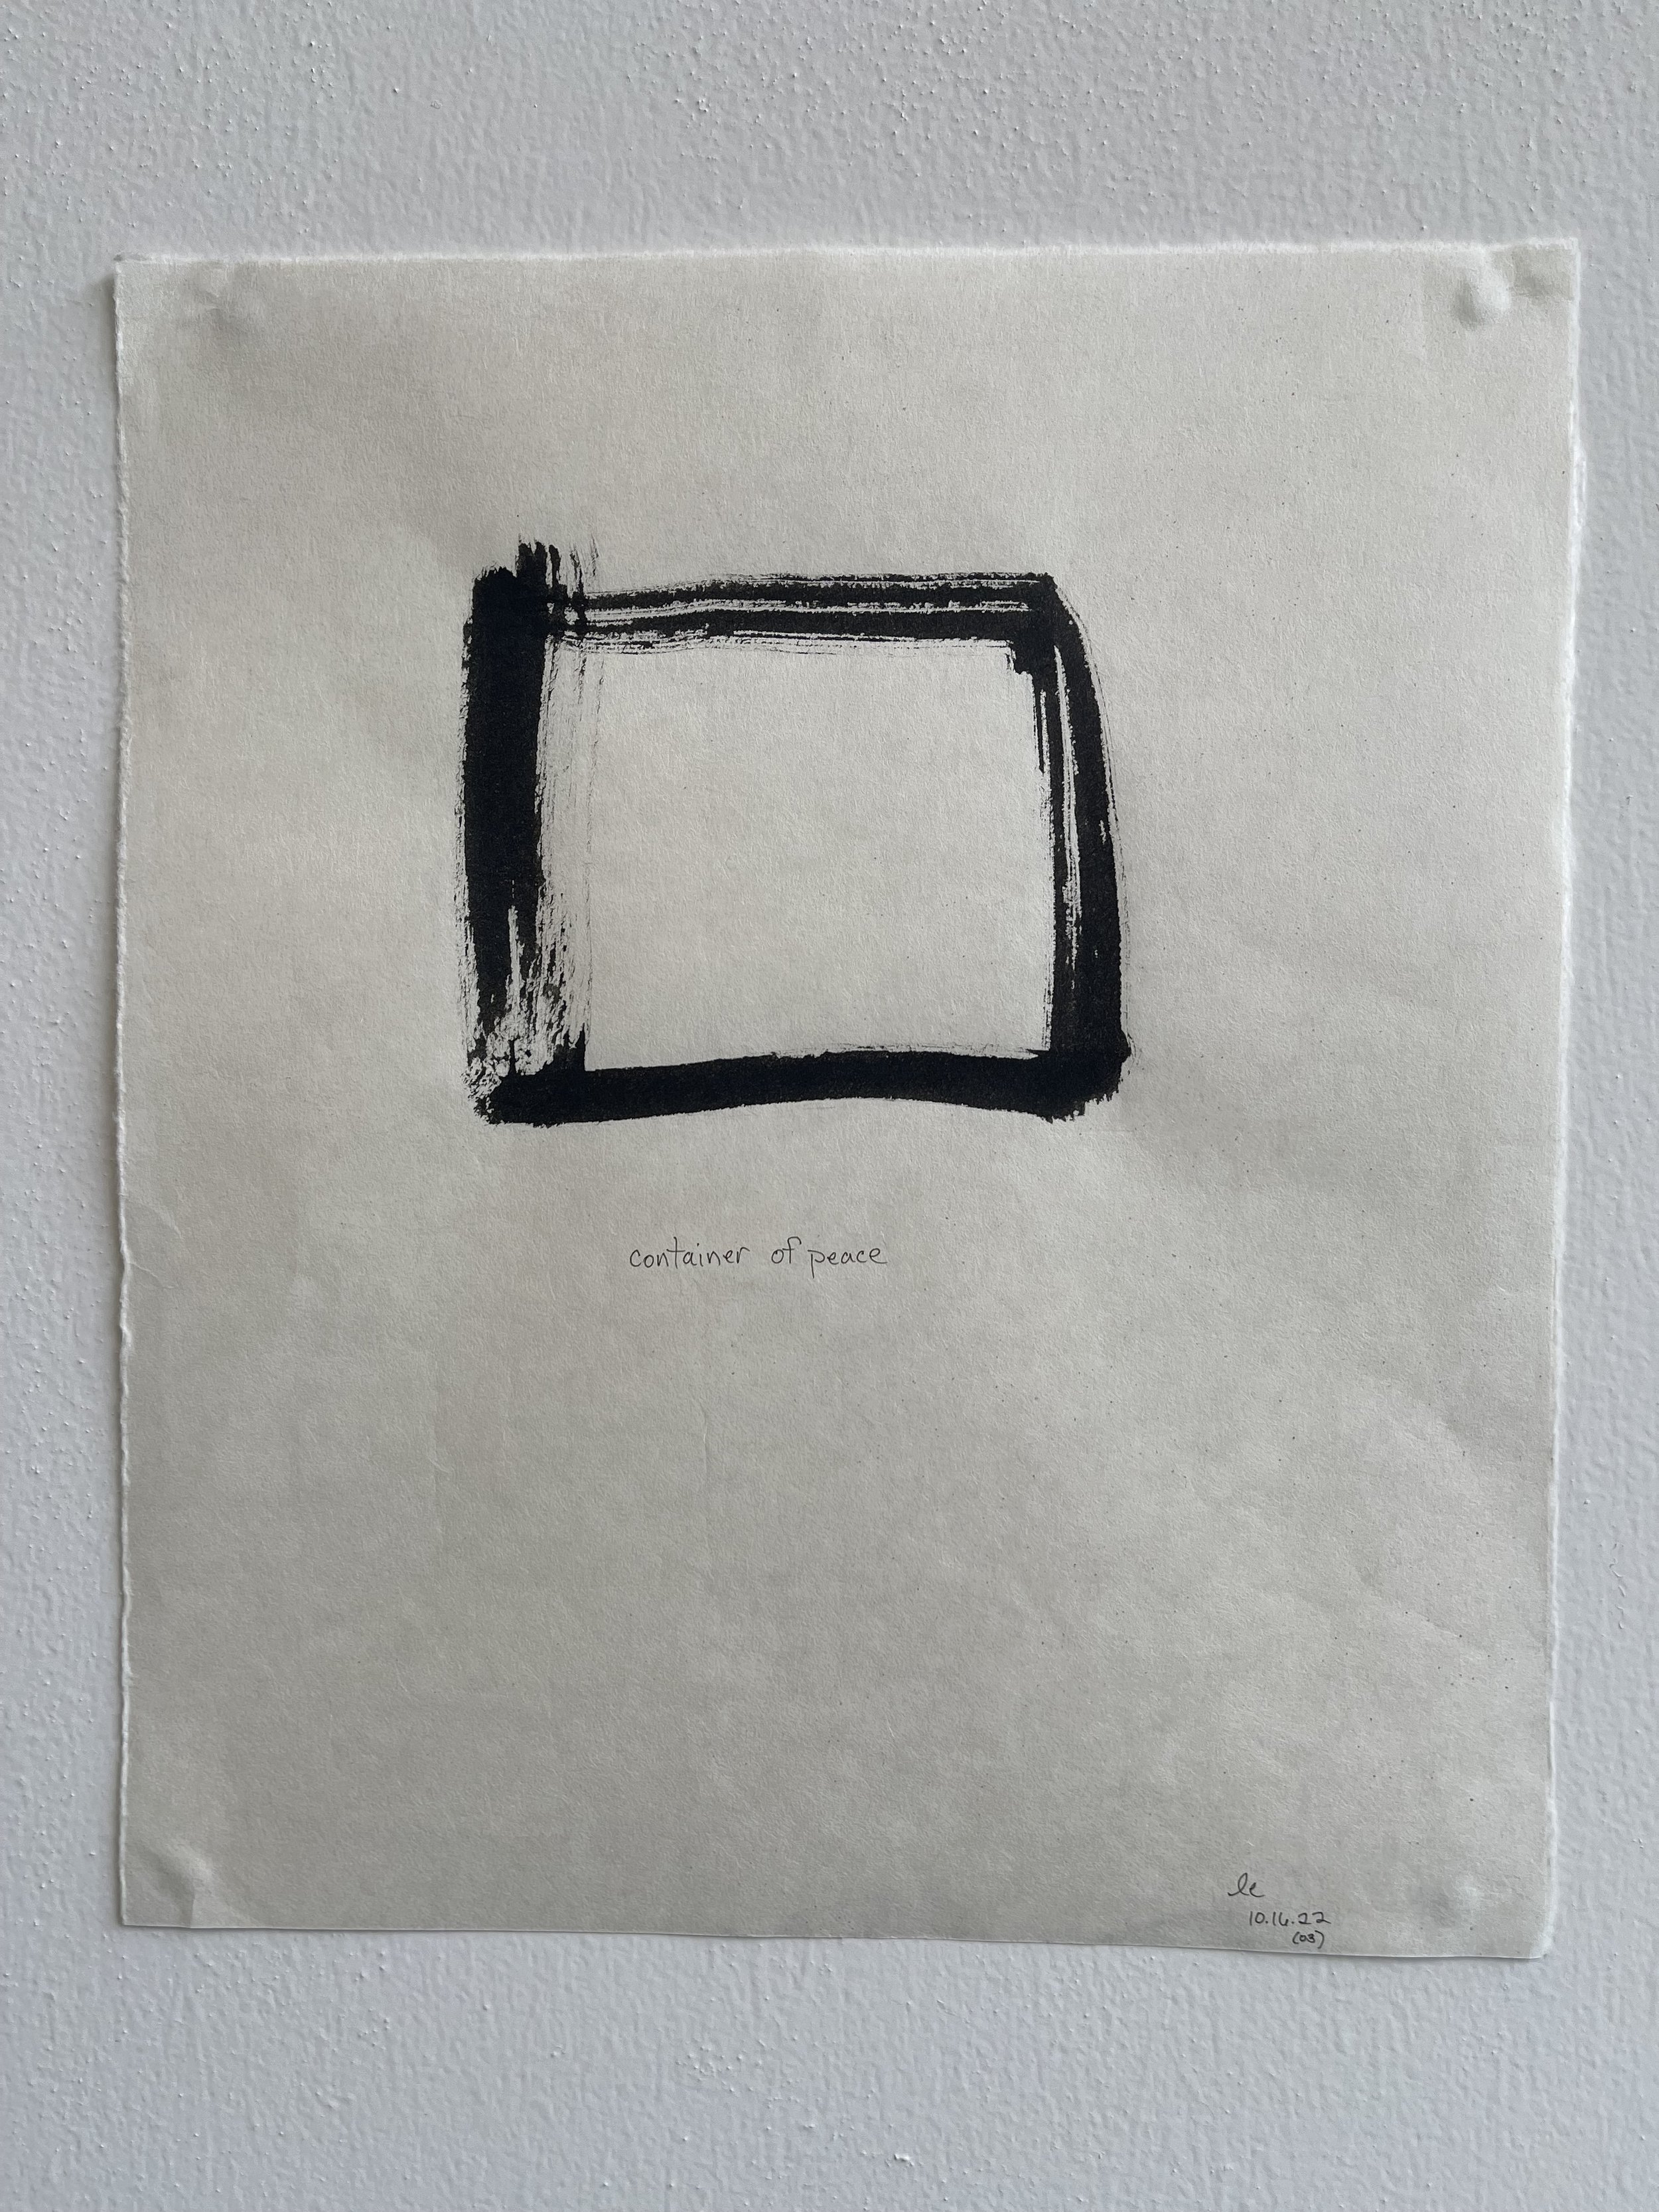 container of peace (03), 2022 | sumi ink on okawara paper | 12" x 14"